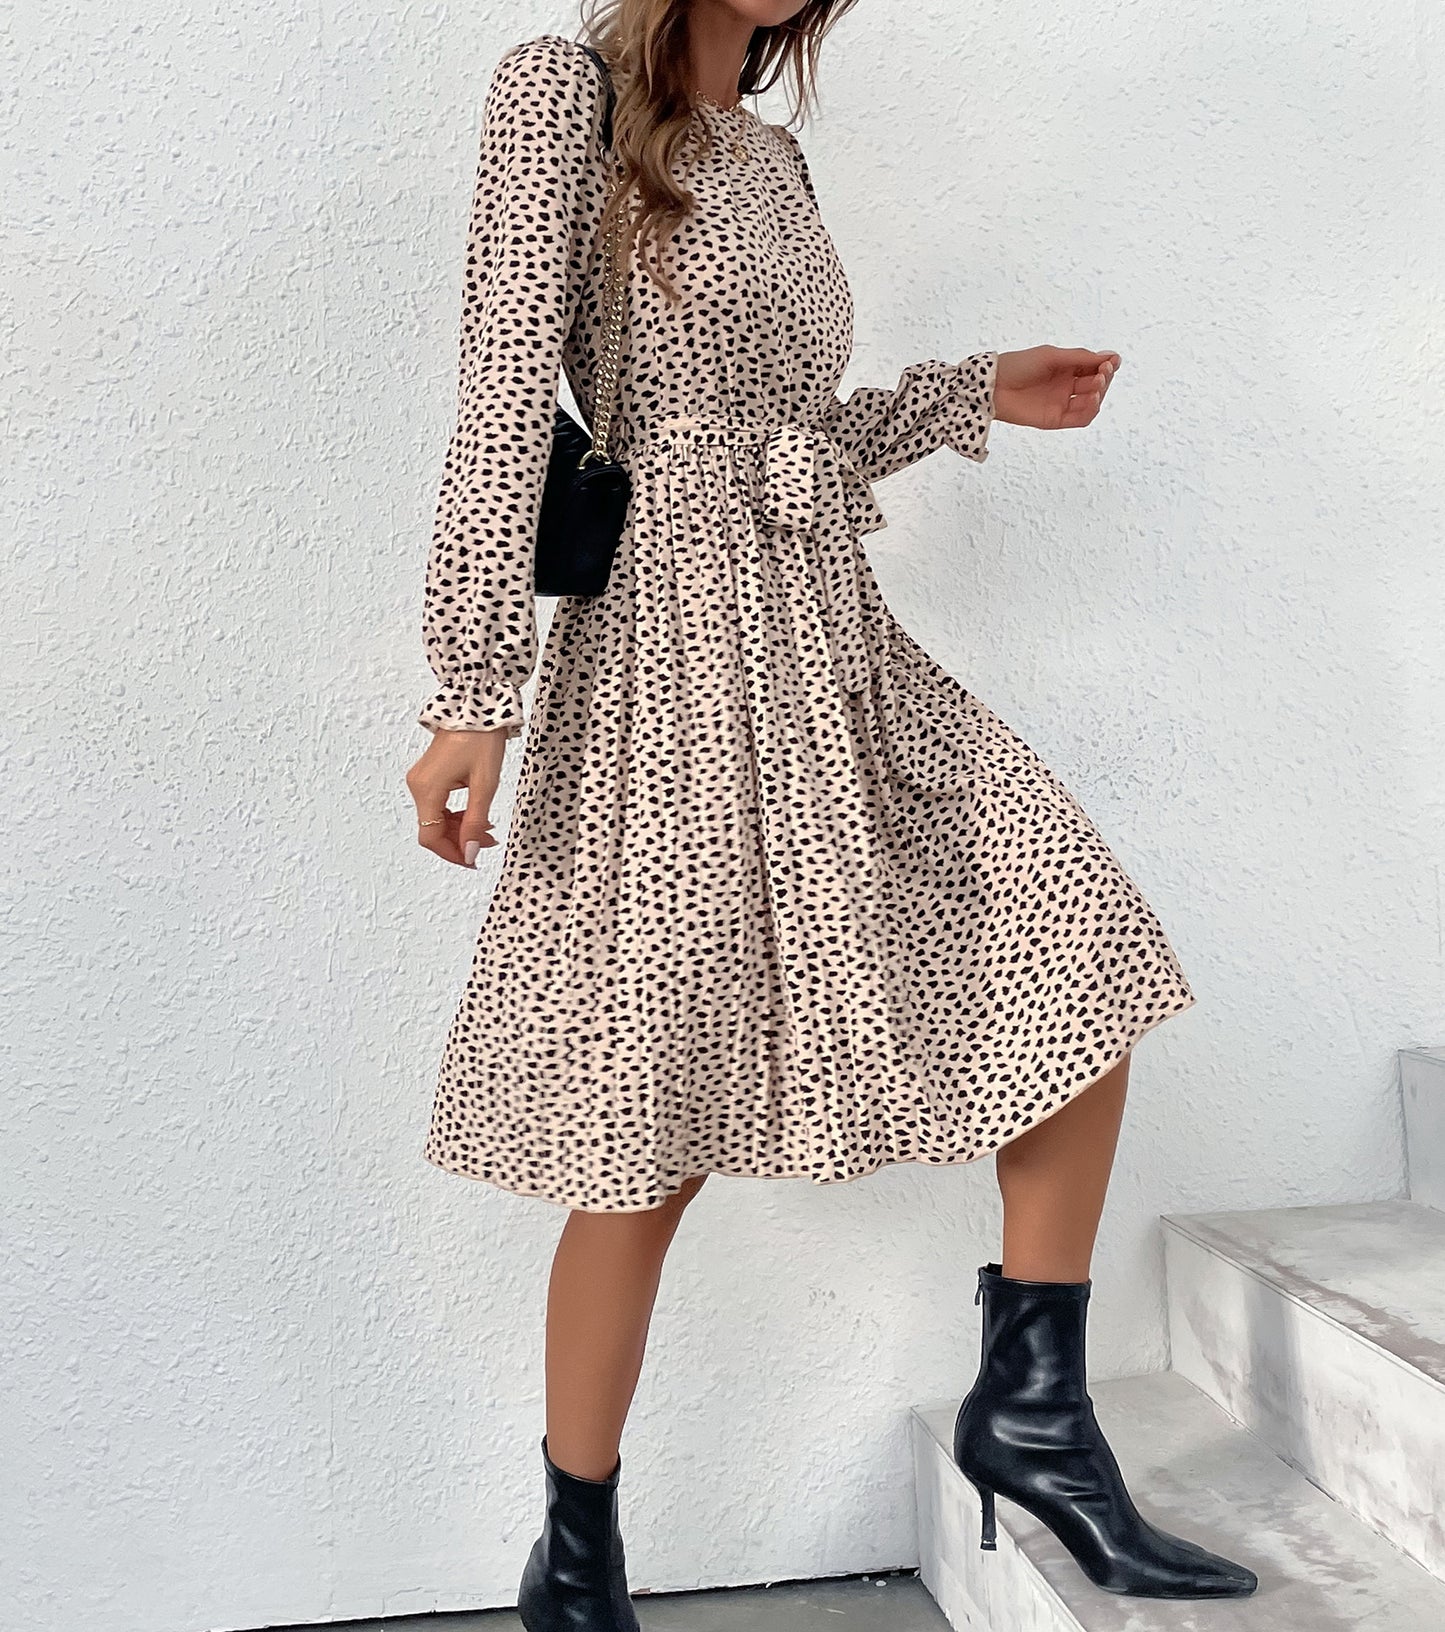 Women Summer Fall Dresses, Smocked Crew Neck Wrap Dress, Wedding Guest Cocktail Party Midi Dress